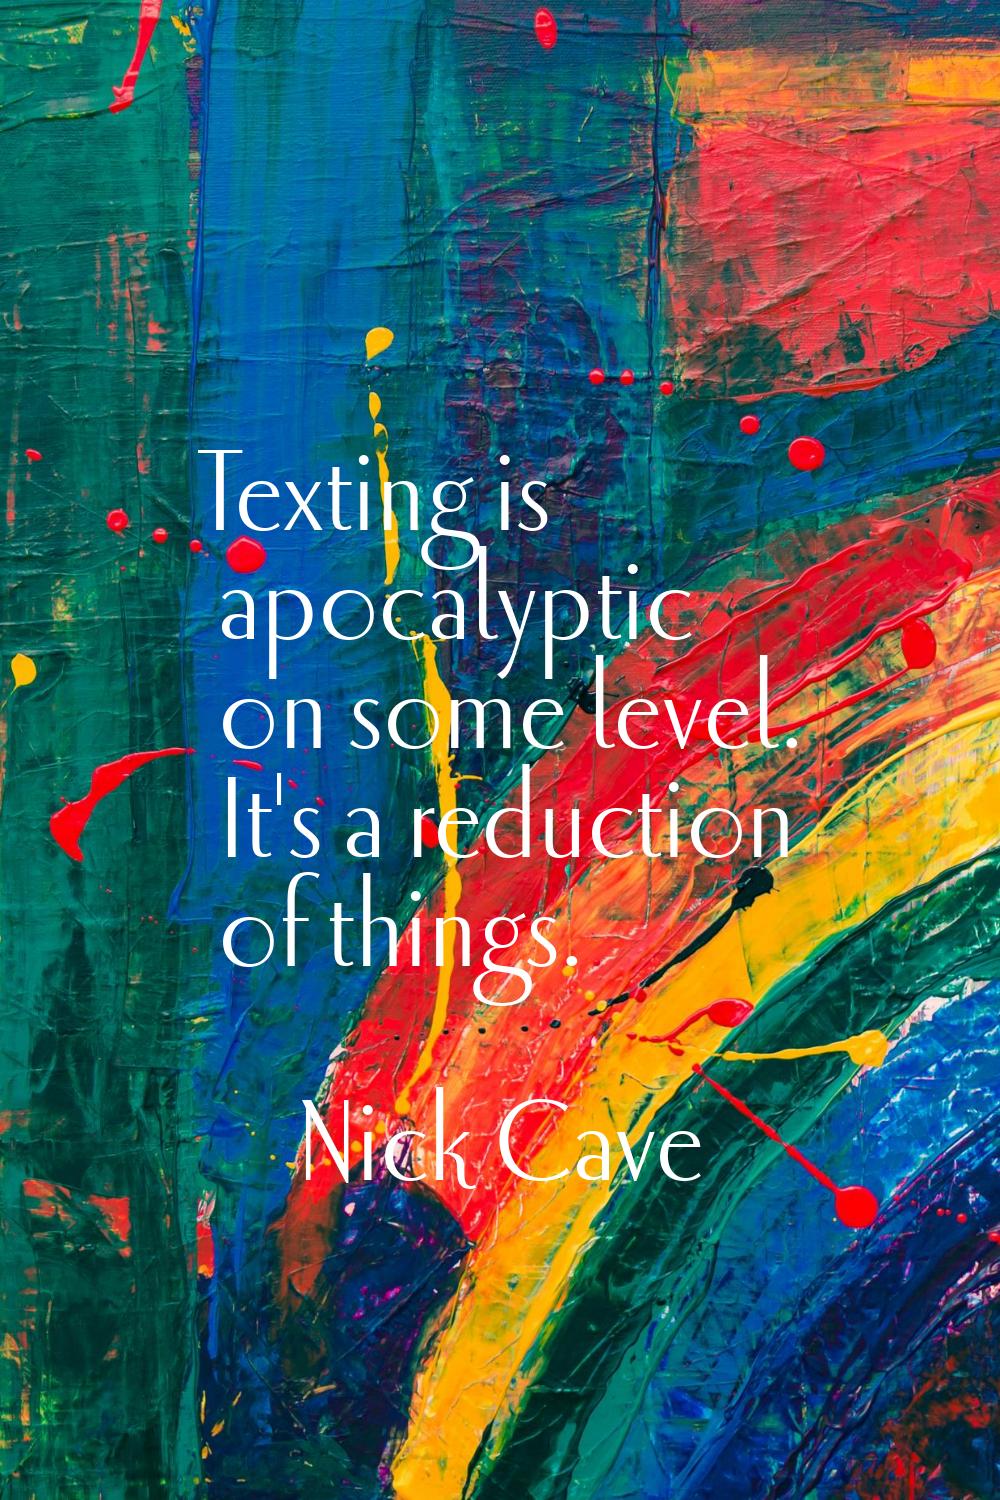 Texting is apocalyptic on some level. It's a reduction of things.